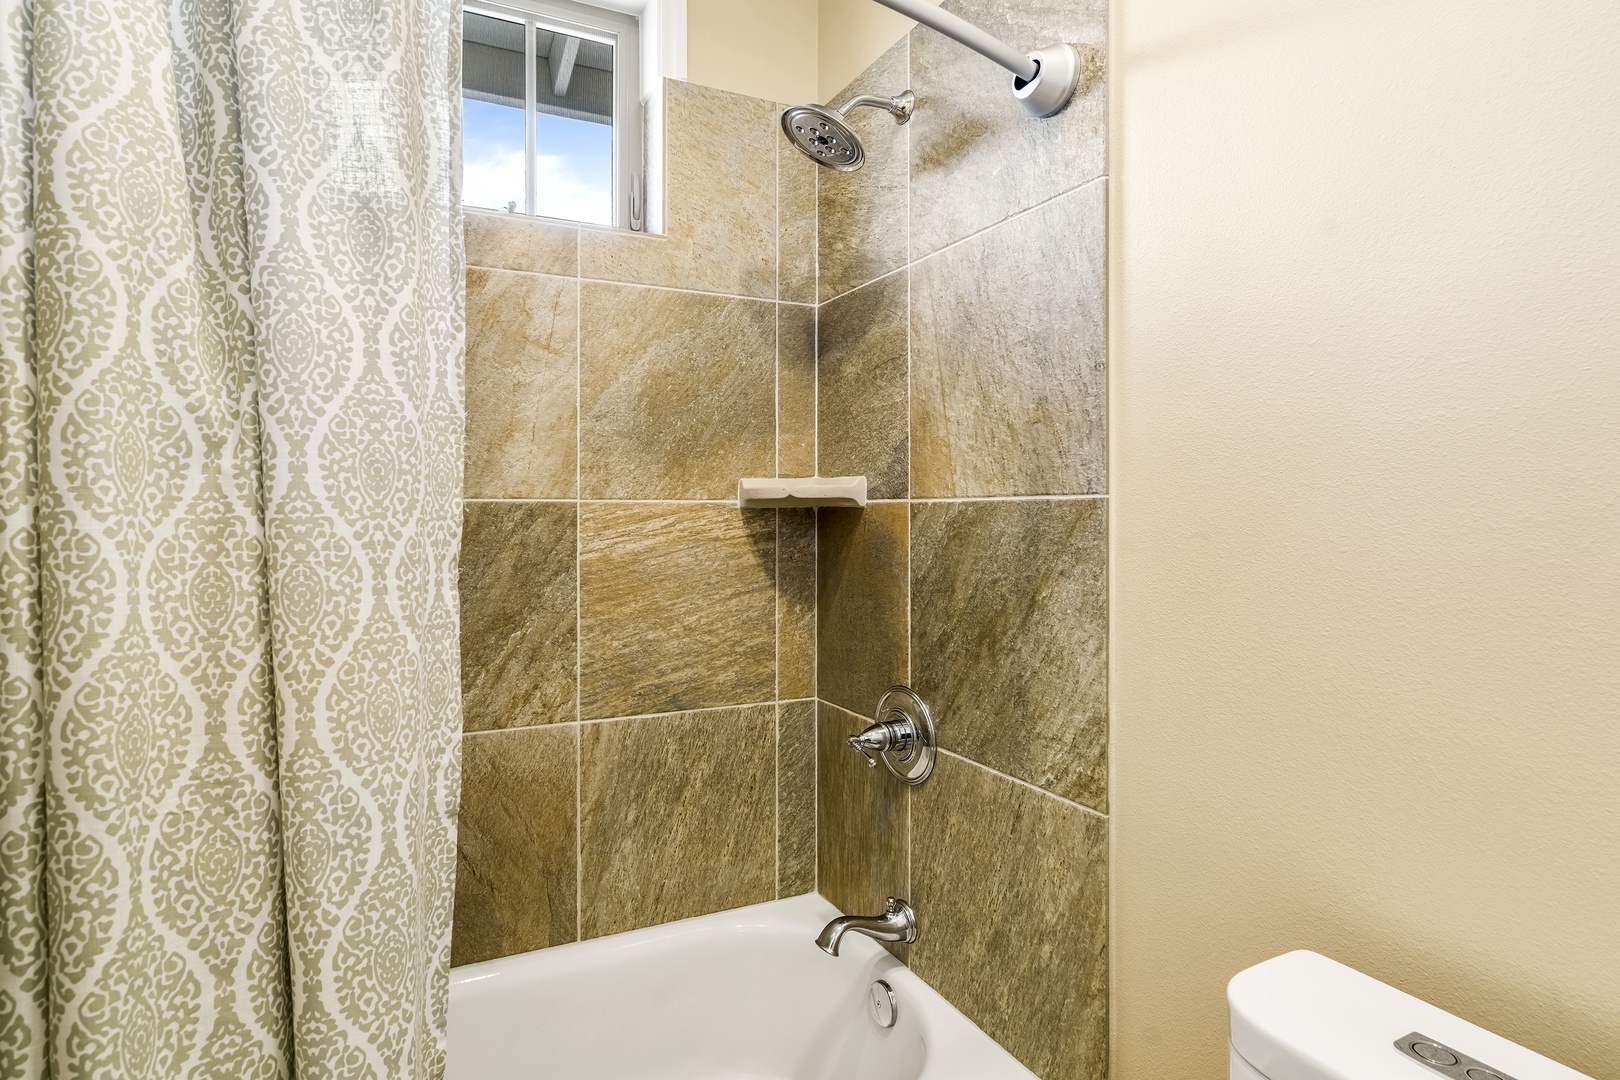 Kailua Kona Vacation Rentals, Golf Green - Tub / shower combo in the upstairs guest bathroom